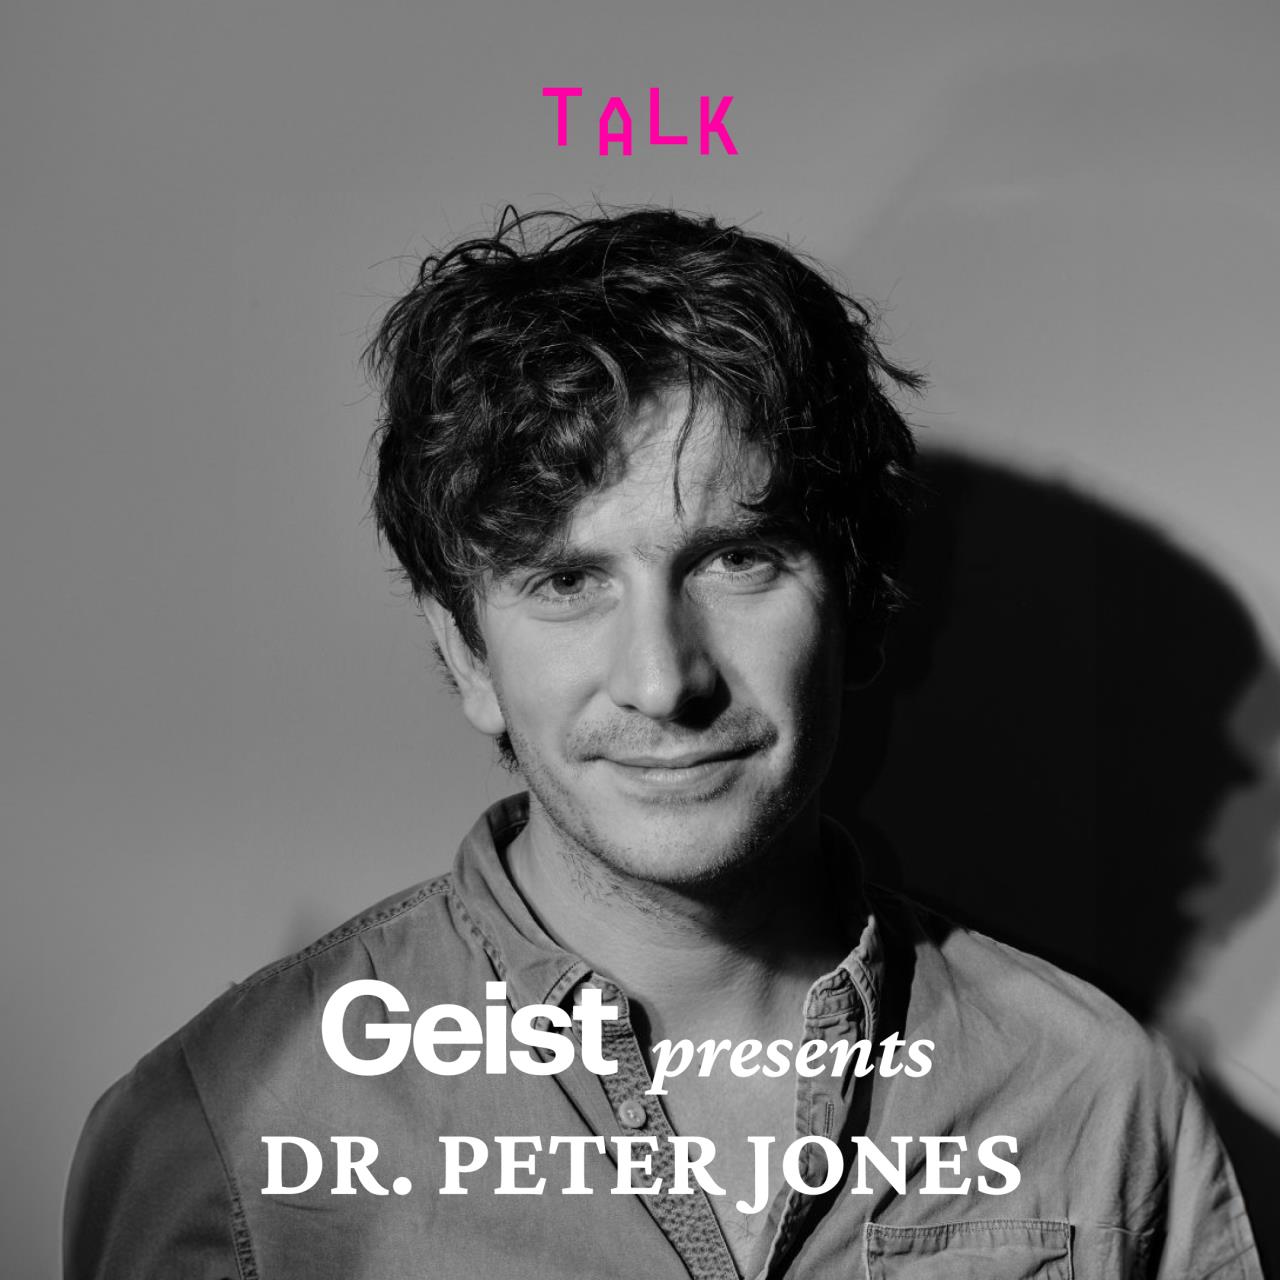 A History of Love with Dr. Peter Jones